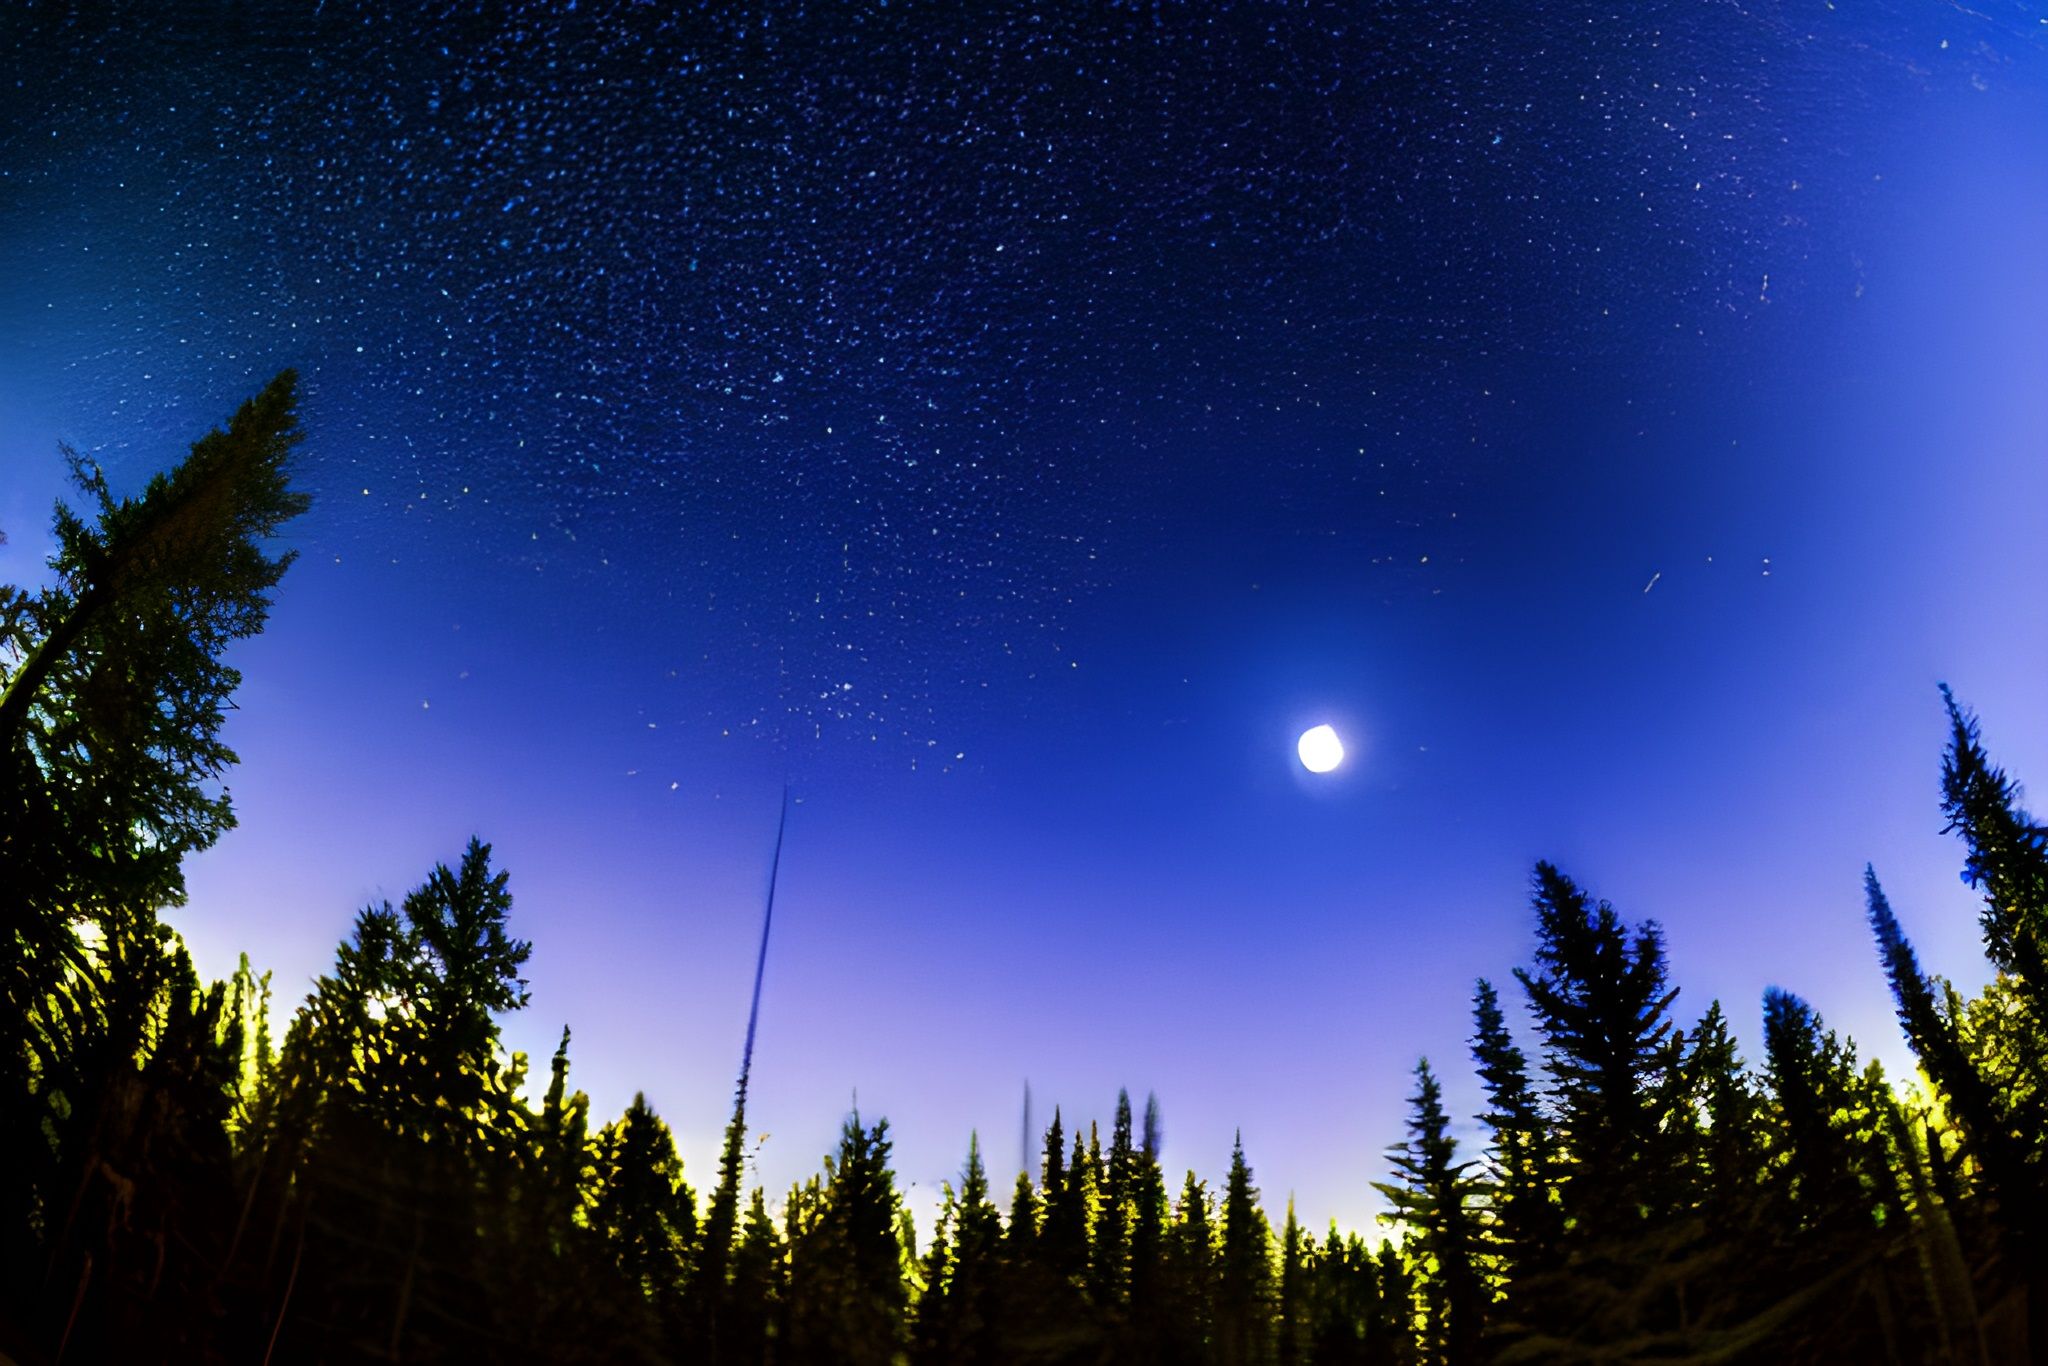 Photographing the sky over a dark forest with a fish-eye lens